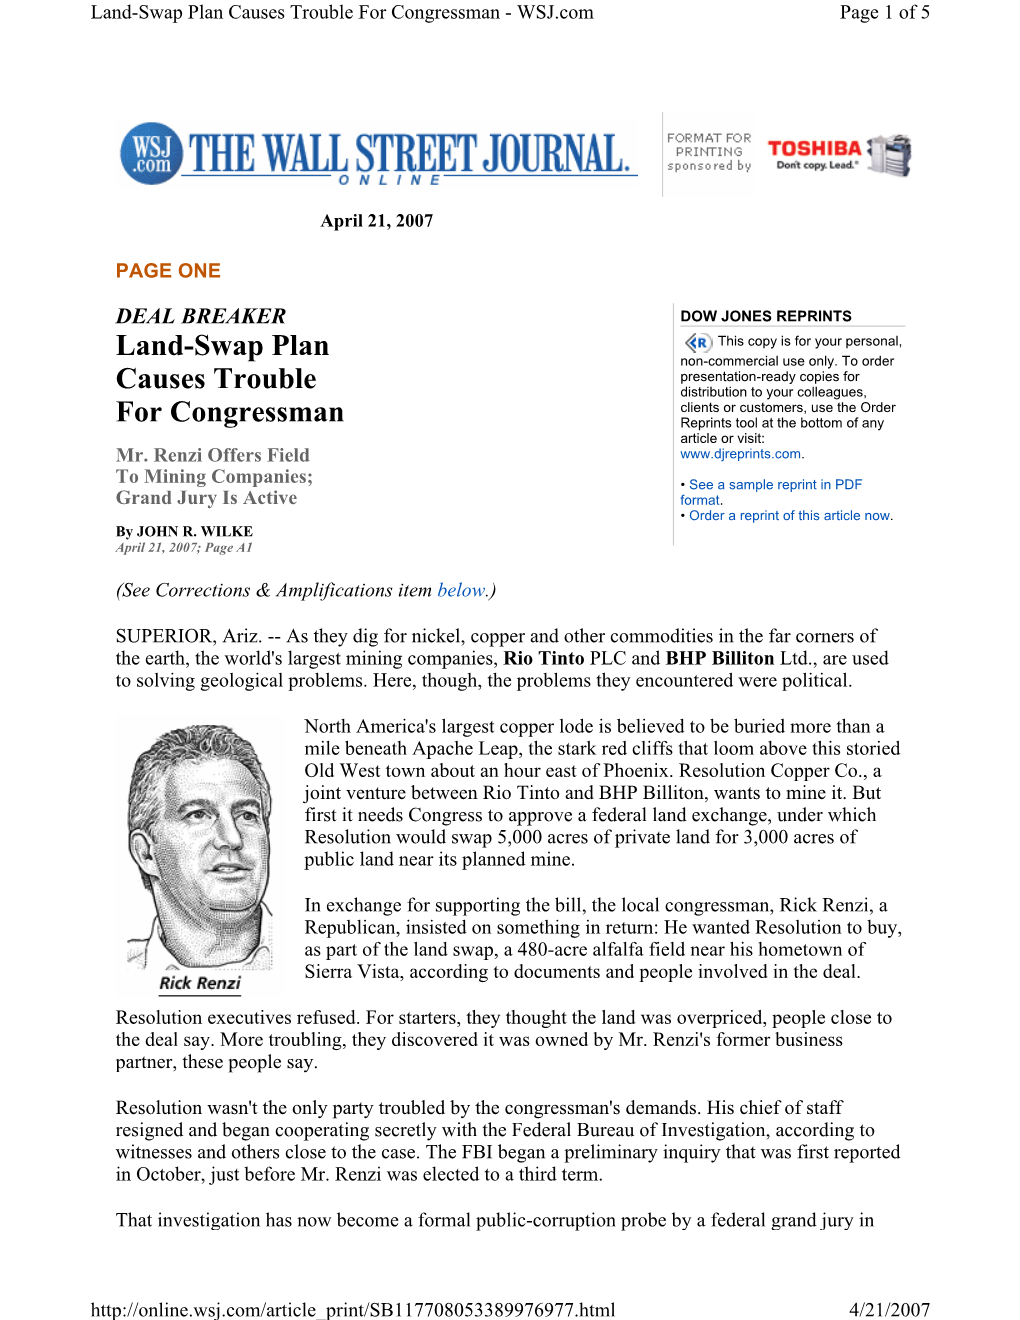 Land-Swap Plan Causes Trouble for Congressman - WSJ.Com Page 1 of 5